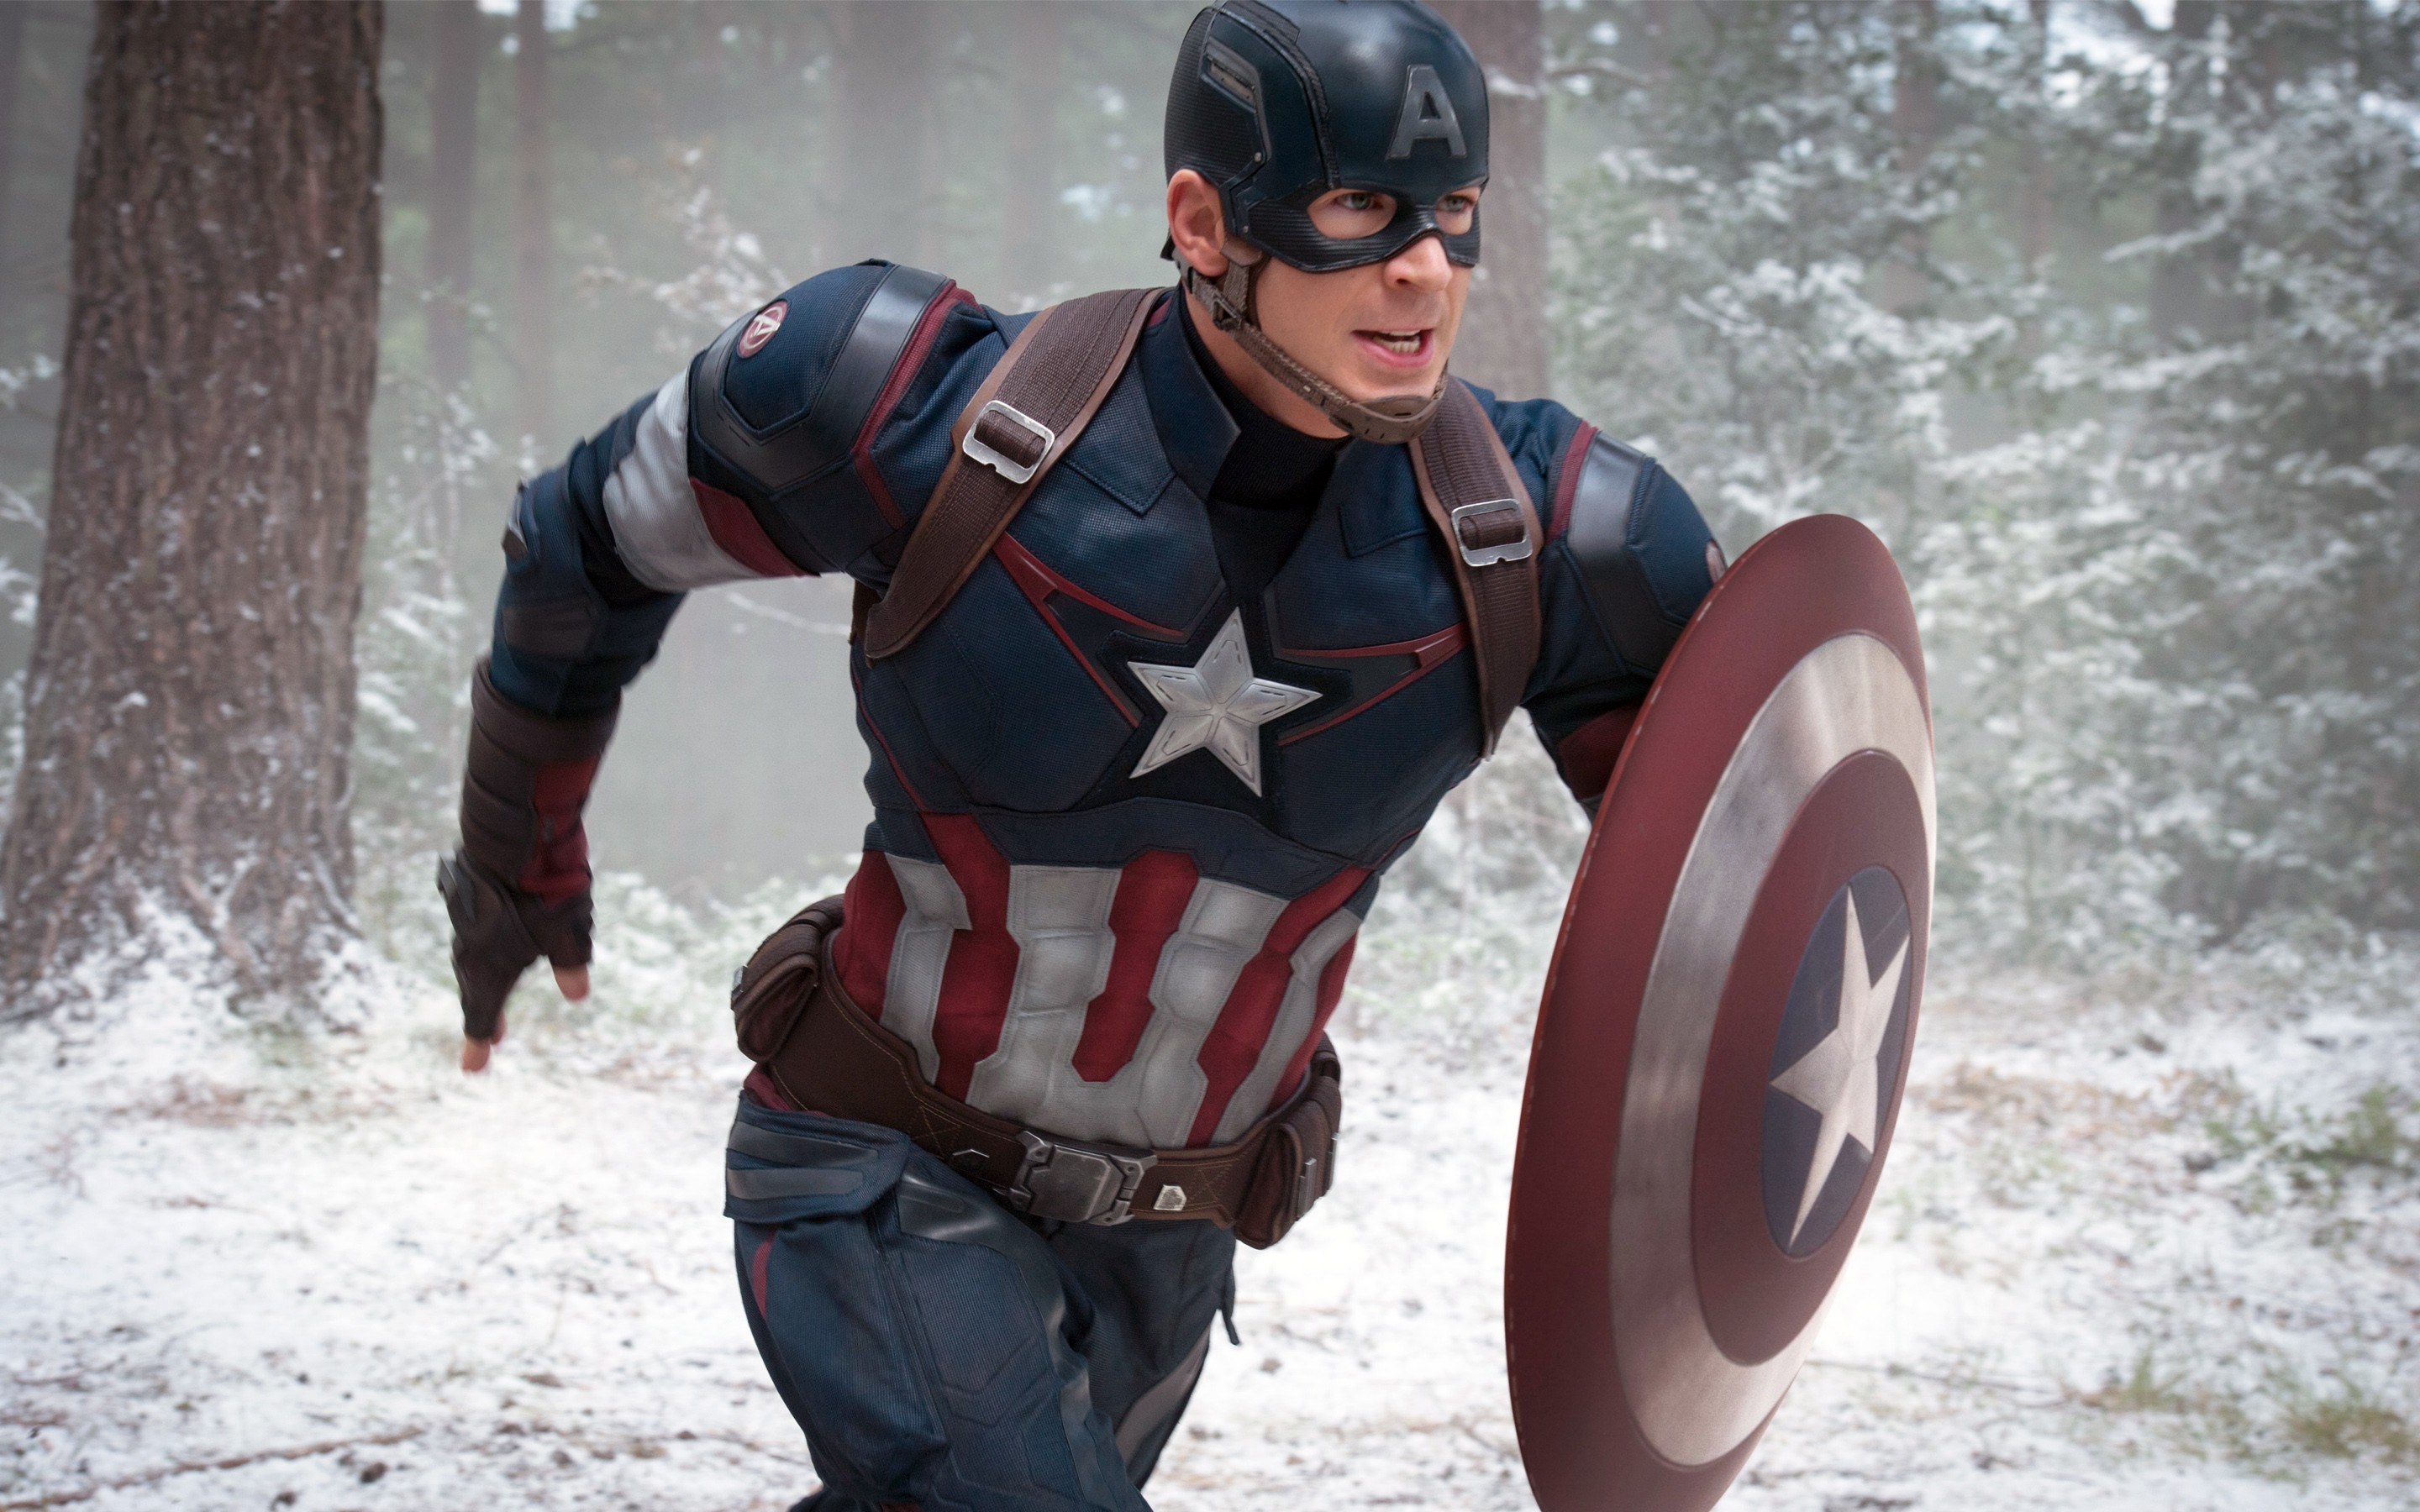 Captain America Avengers 2 Movie Wallpaper   New HD Wallpapers